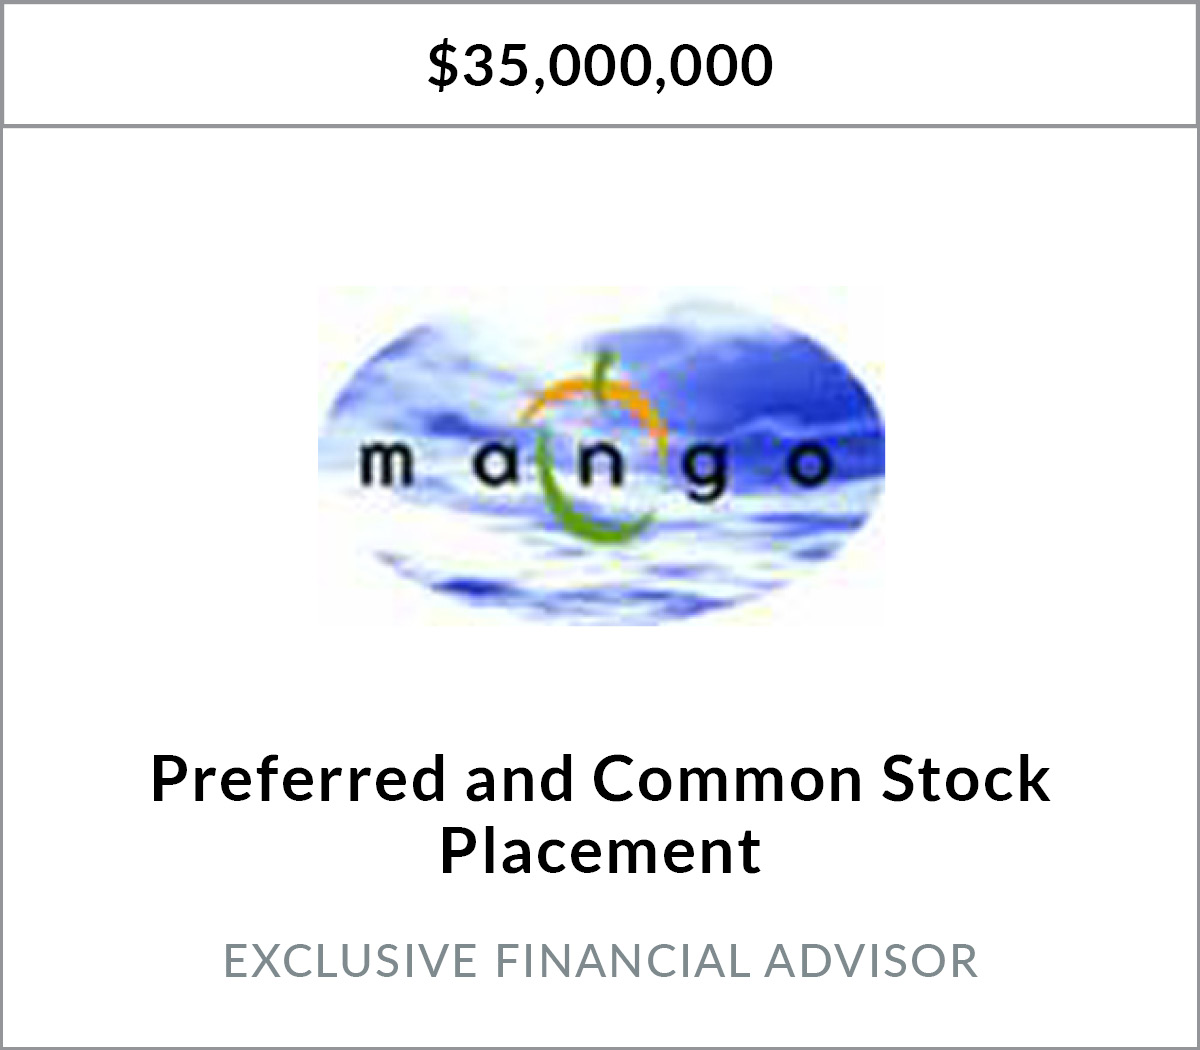 MangoSoft Inc. Raises $35 Million in a Private Placement of Preferred and Common Stock